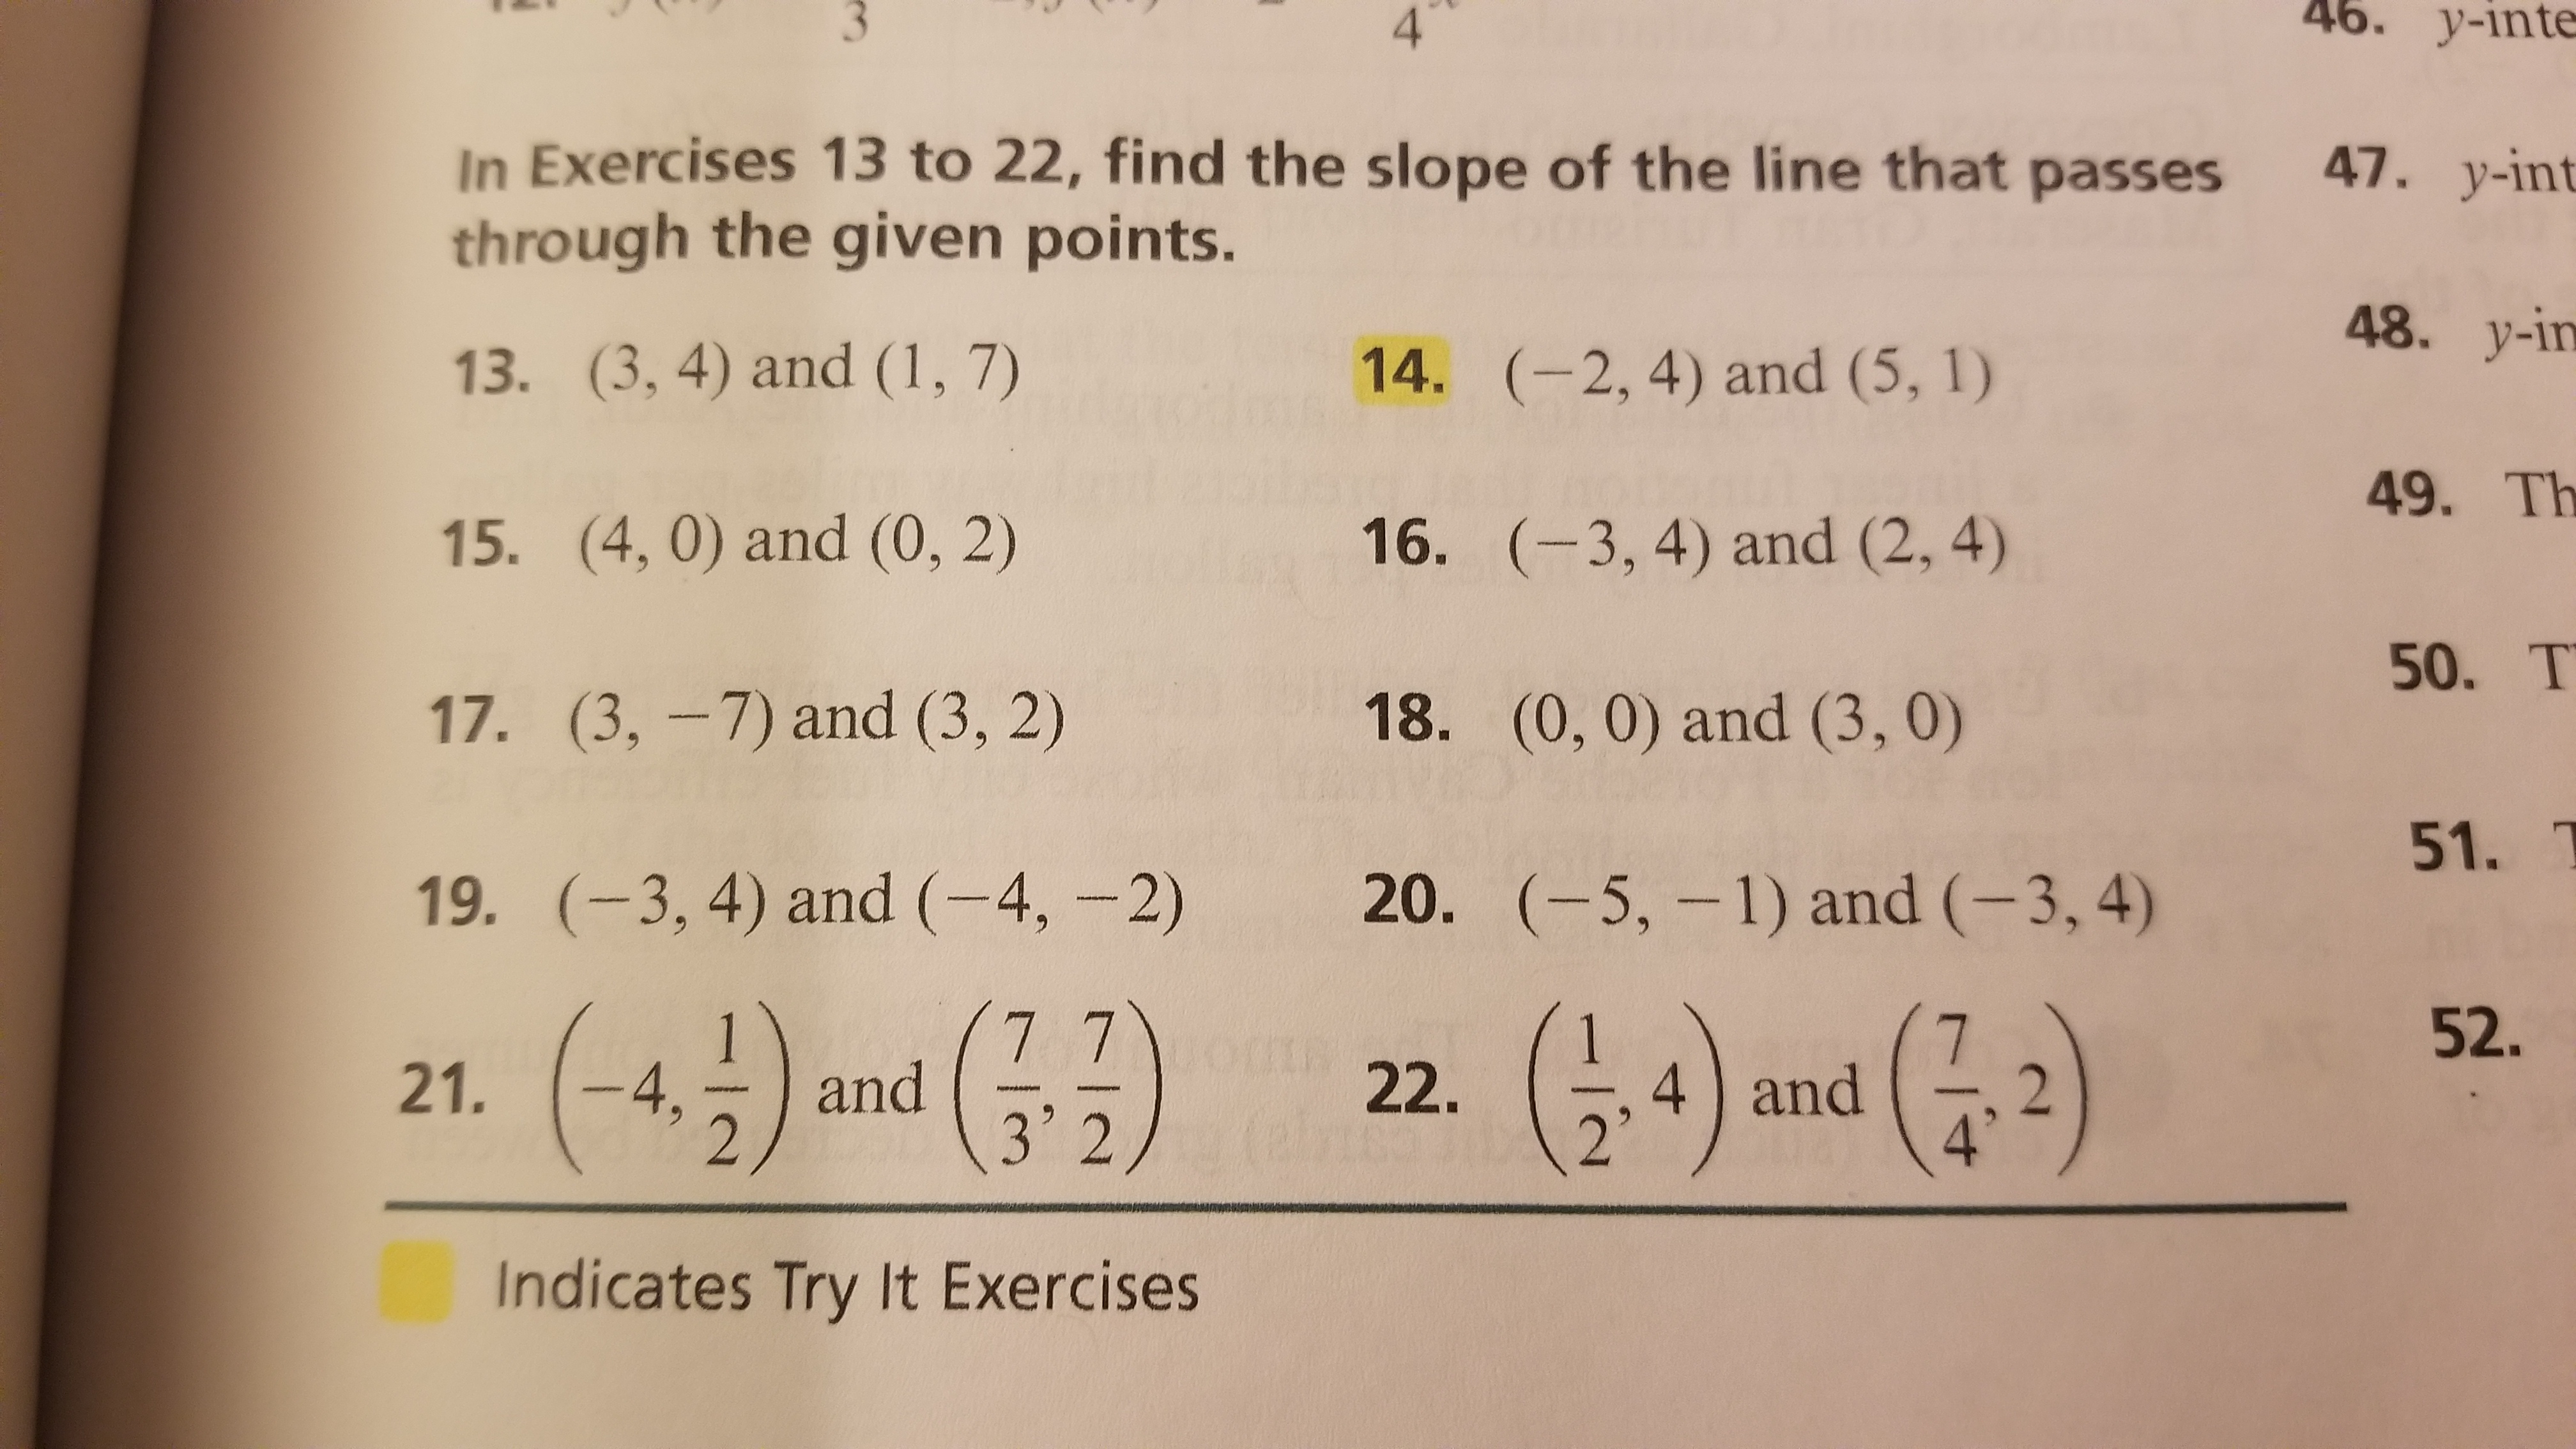 4.
46. y-inte
In Exercises 13 to 22, find the slope of the line that passes
through the given points.
47. y-int
48. y-in
13. (3, 4) and (1, 7)
14. (-2, 4) and (5, 1)
49. Th
15. (4, 0) and (0, 2)
16. (-3, 4) and (2, 4)
50. T
17. (3, -7) and (3, 2)
18. (0, 0) and (3, 0)
51. T
19. (-3, 4) and (-4, -2)
20. (-5, -1) and (-3, 4)
21. (-4) and G)
(:+)
77
52.
4 and
2'
22.
3'2
Indicates Try It Exercises
3.
